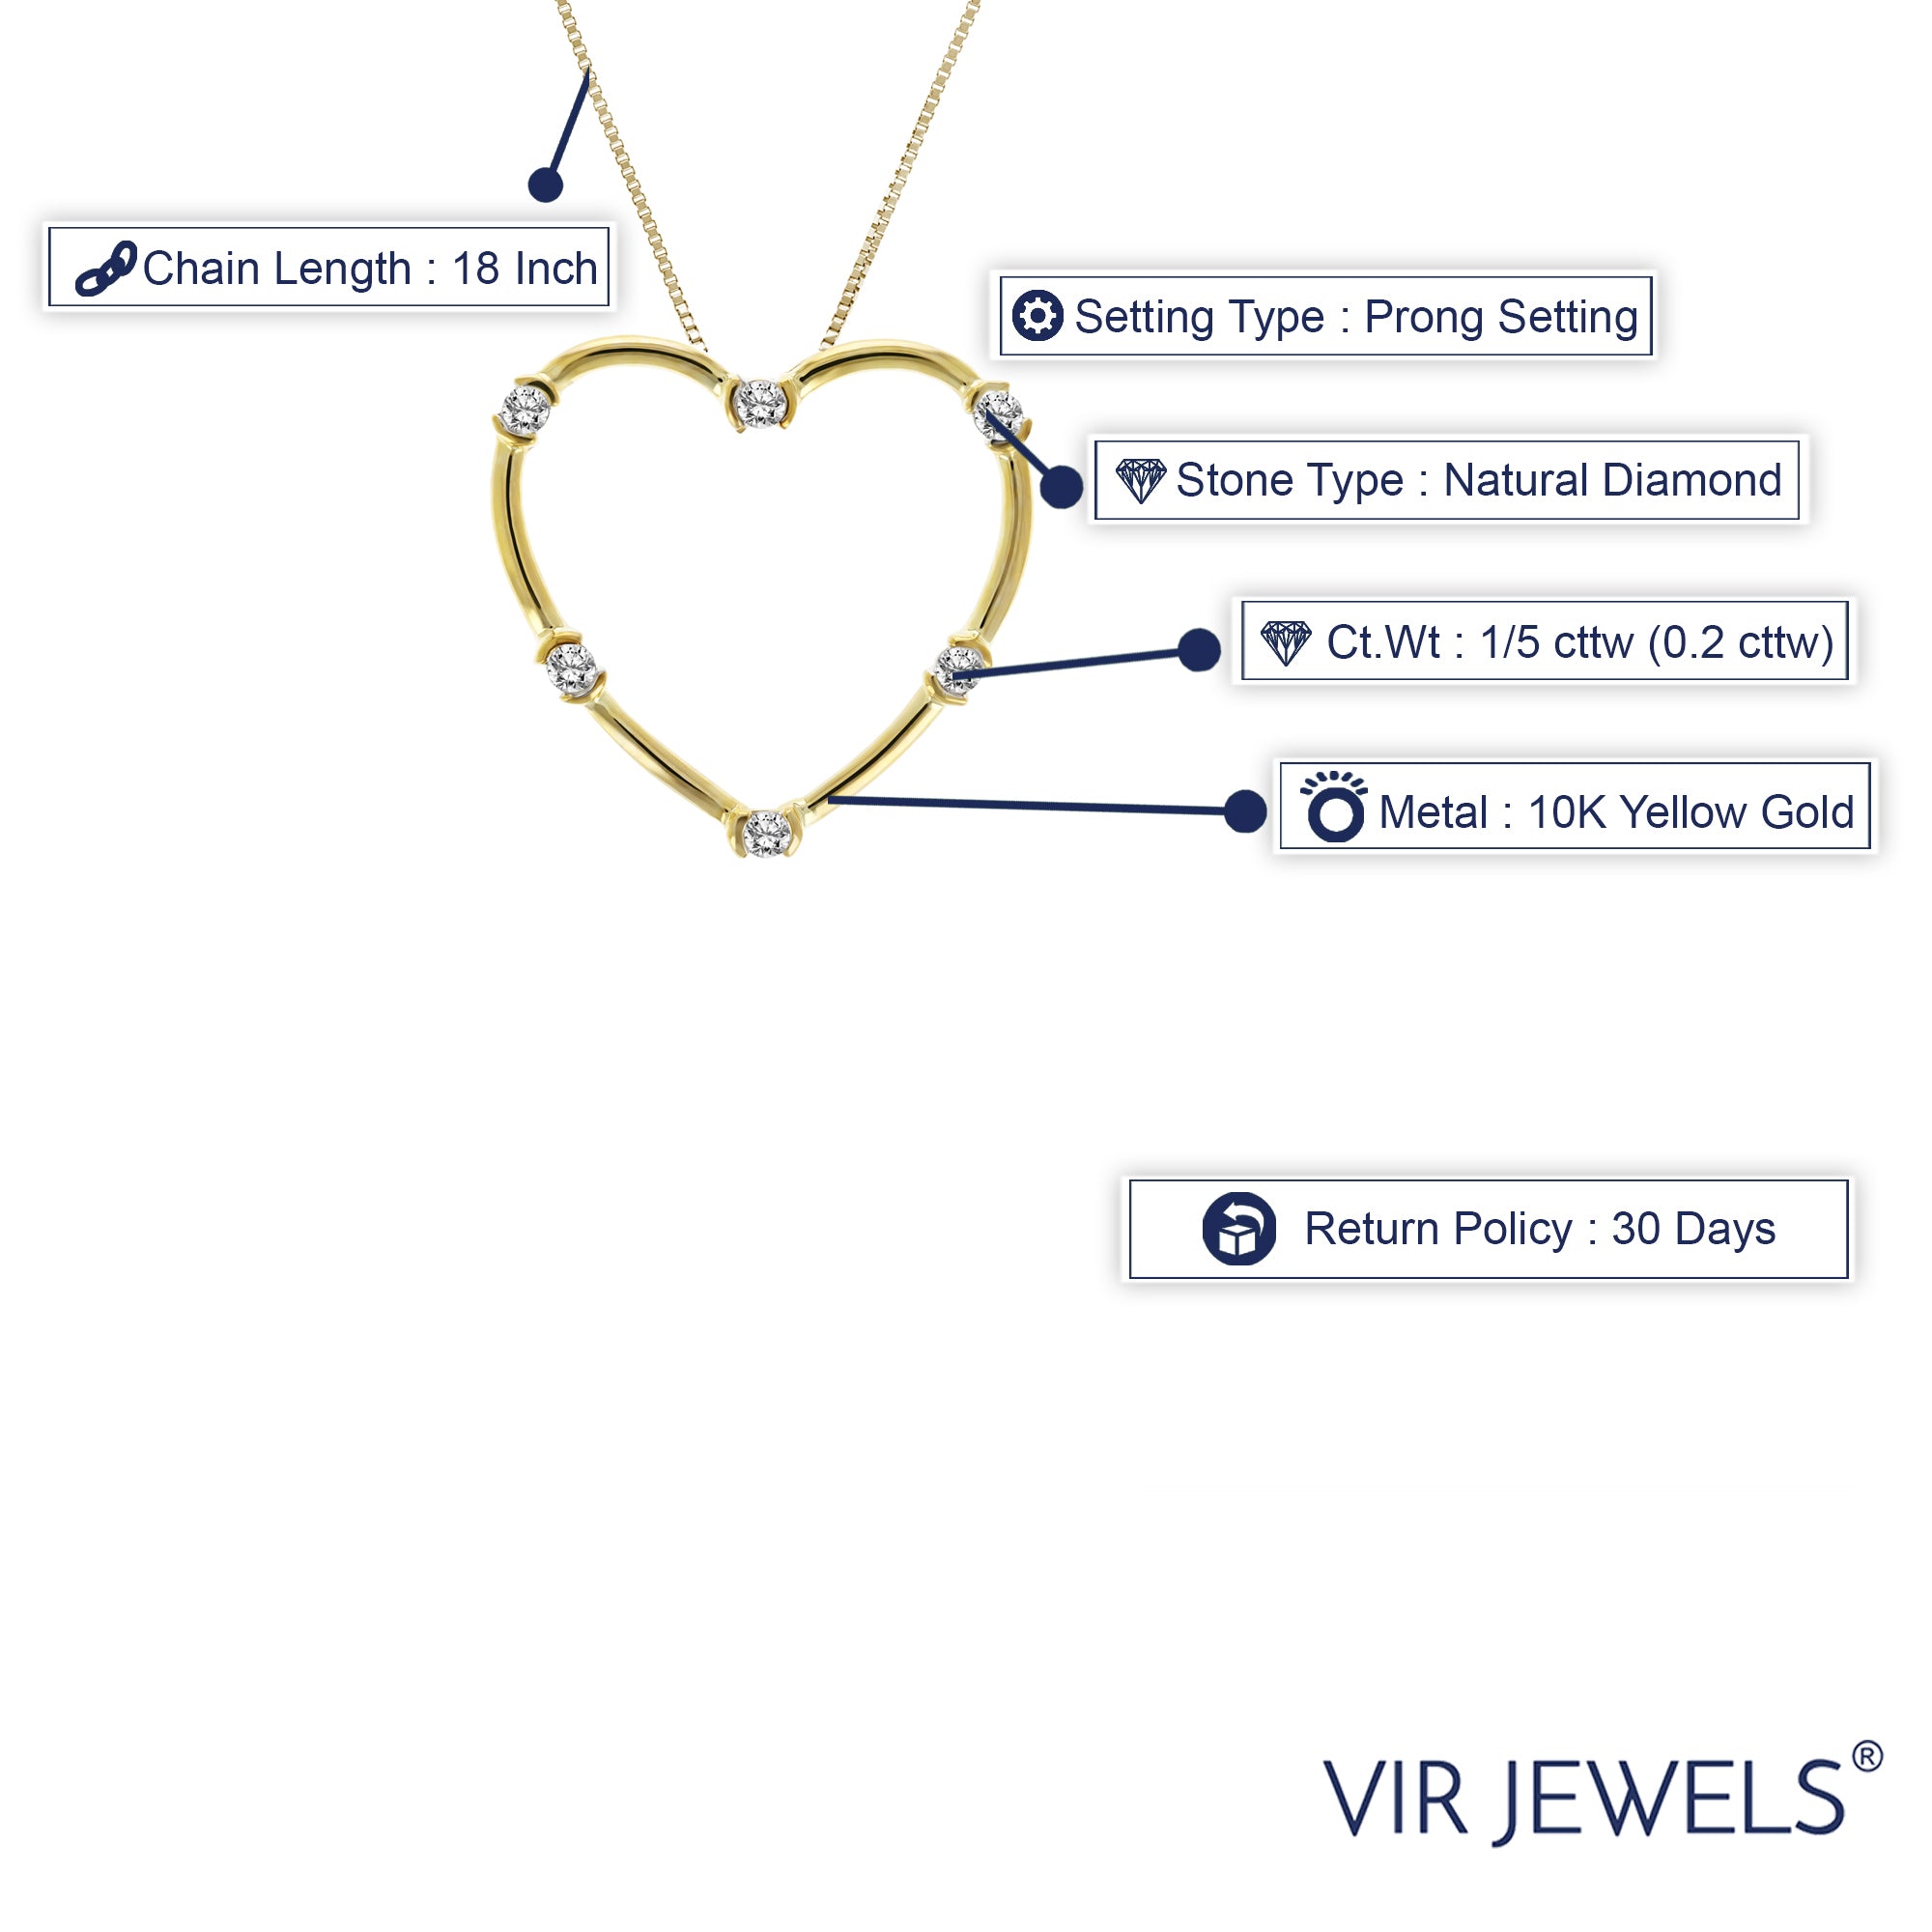 1/5 cttw Diamond Heart Pendant Necklace 10K Yellow Gold with 18 Inch Chain